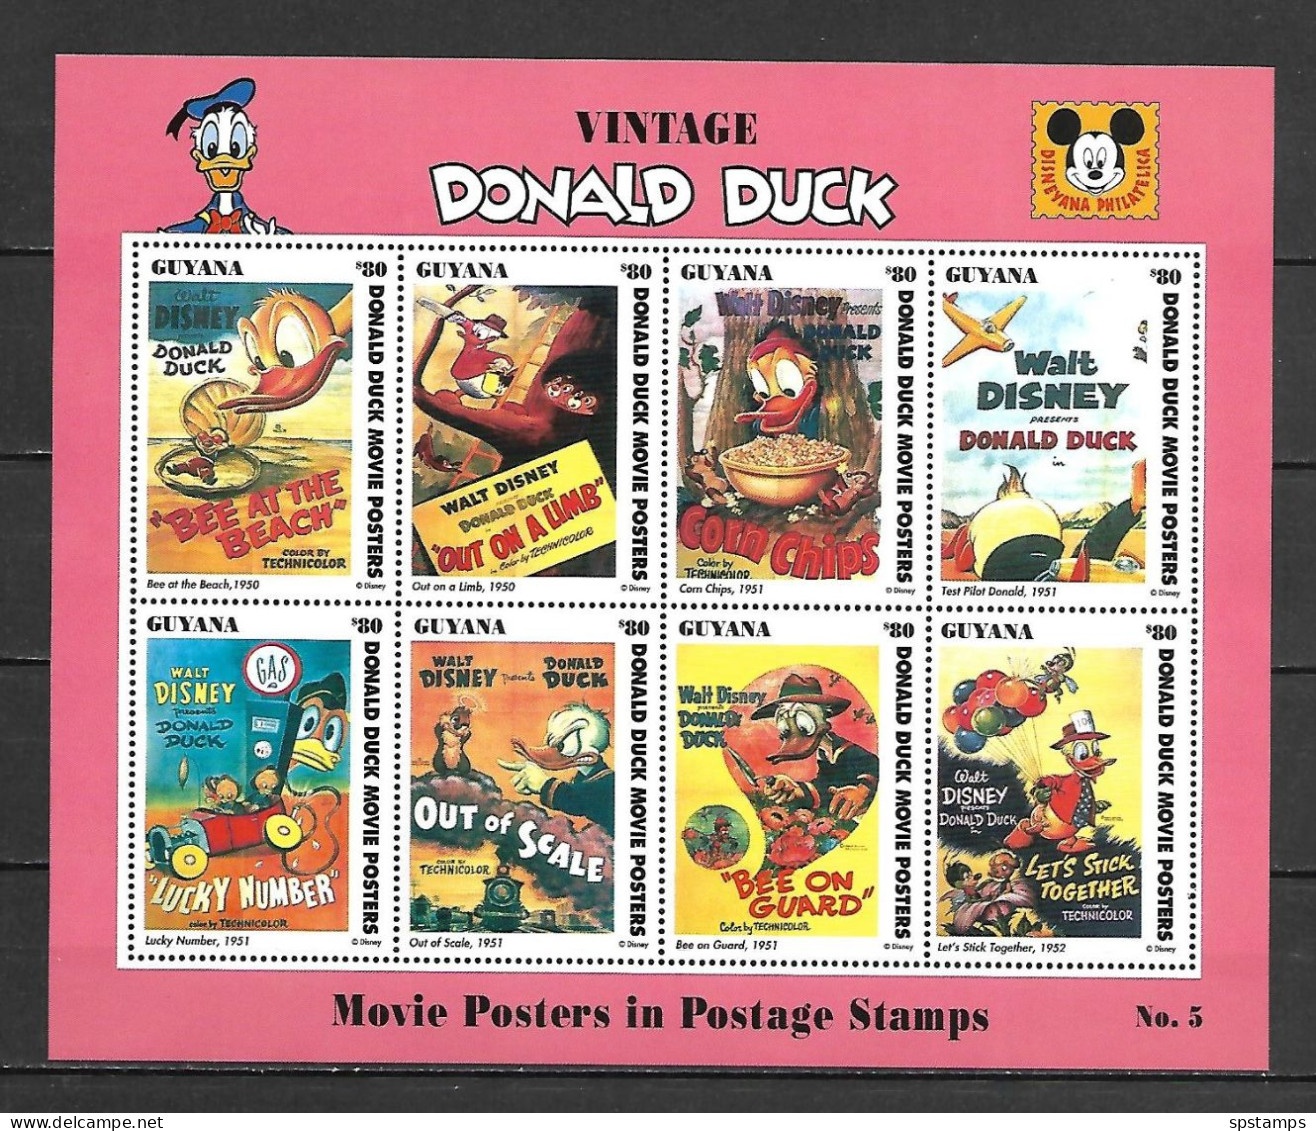 Disney Guyana 1993 Donald Duck - Movie Posters Sheetlet #5 (WITHOUT LABEL) MNH - Disney